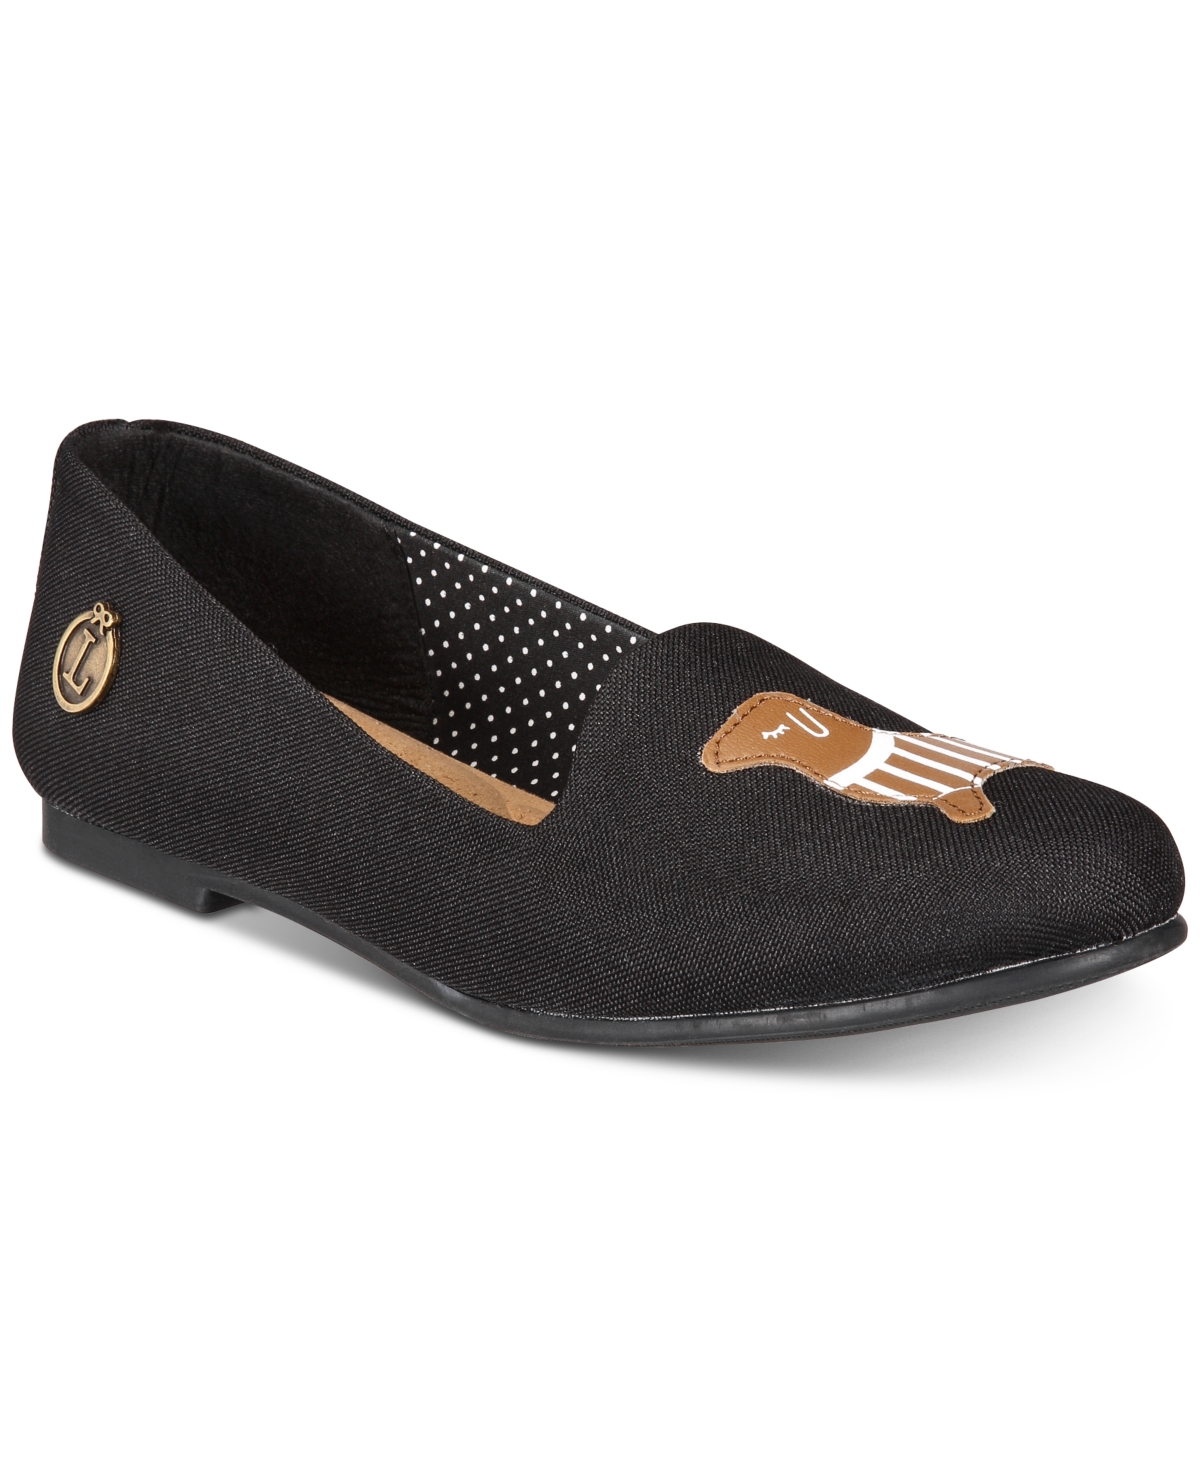 Loly in the Sky Evita Loafers Women's Shoes